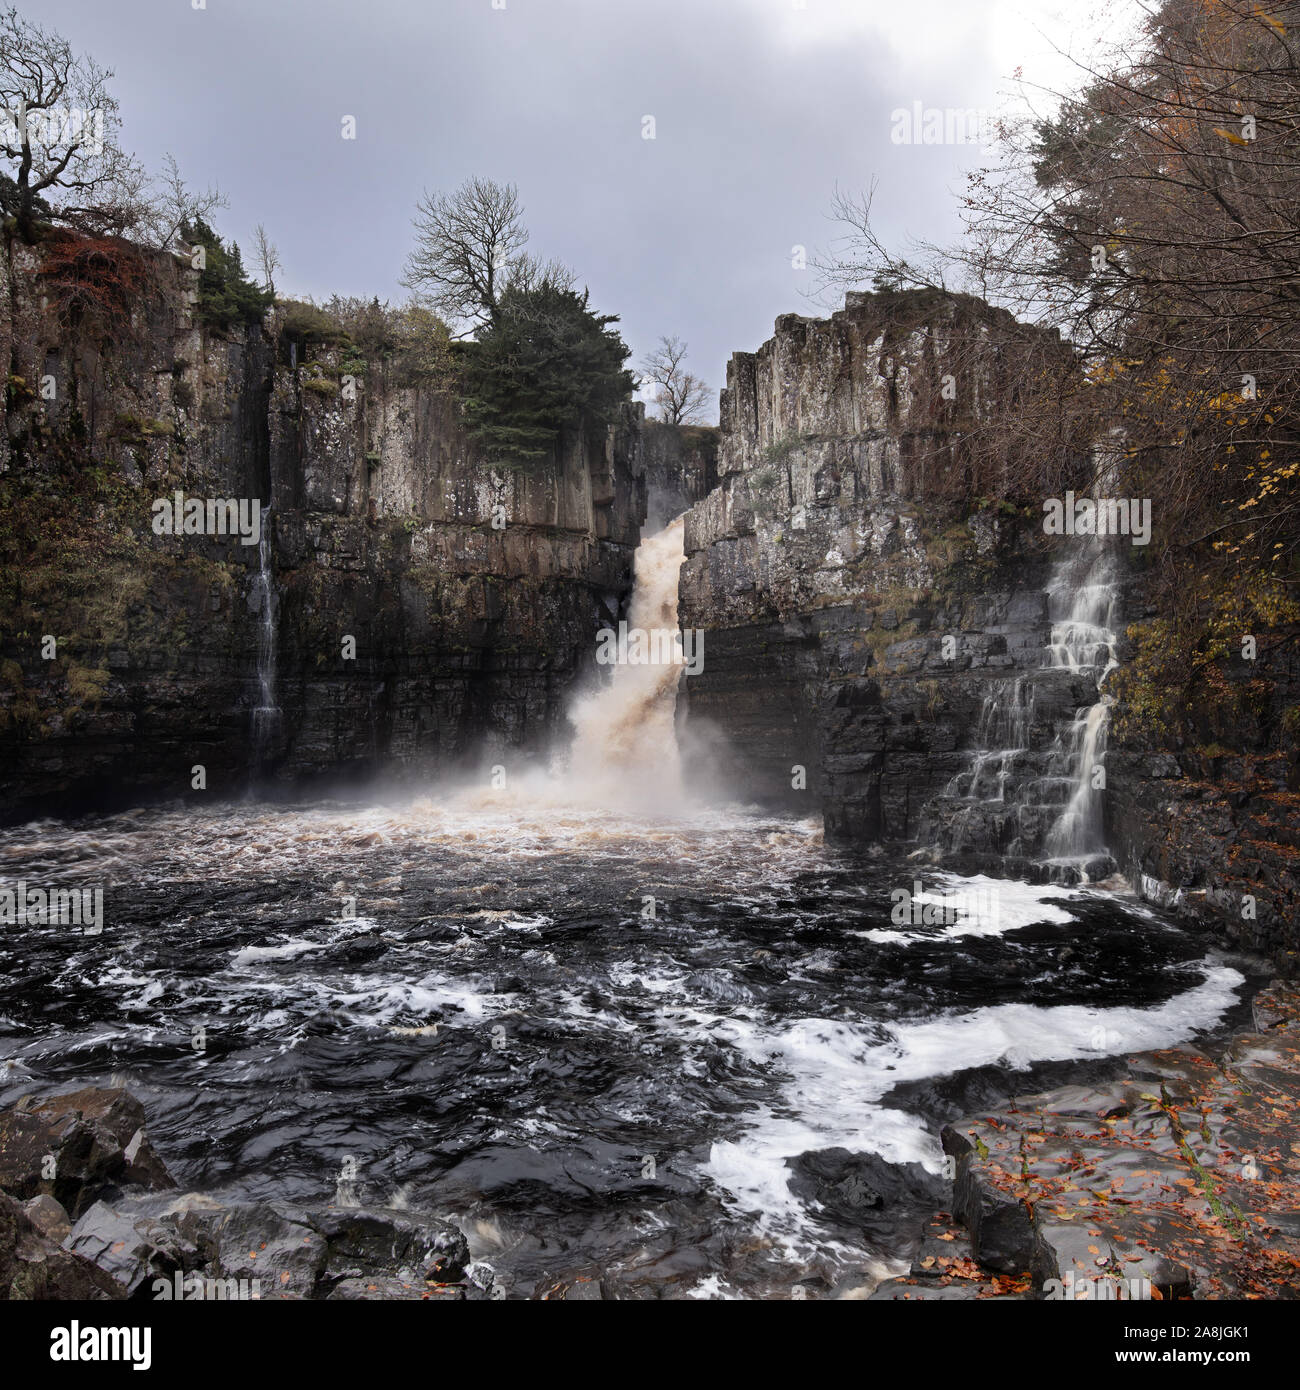 High-force waterfall on the River Tees in County Durham, United Kingdom Stock Photo